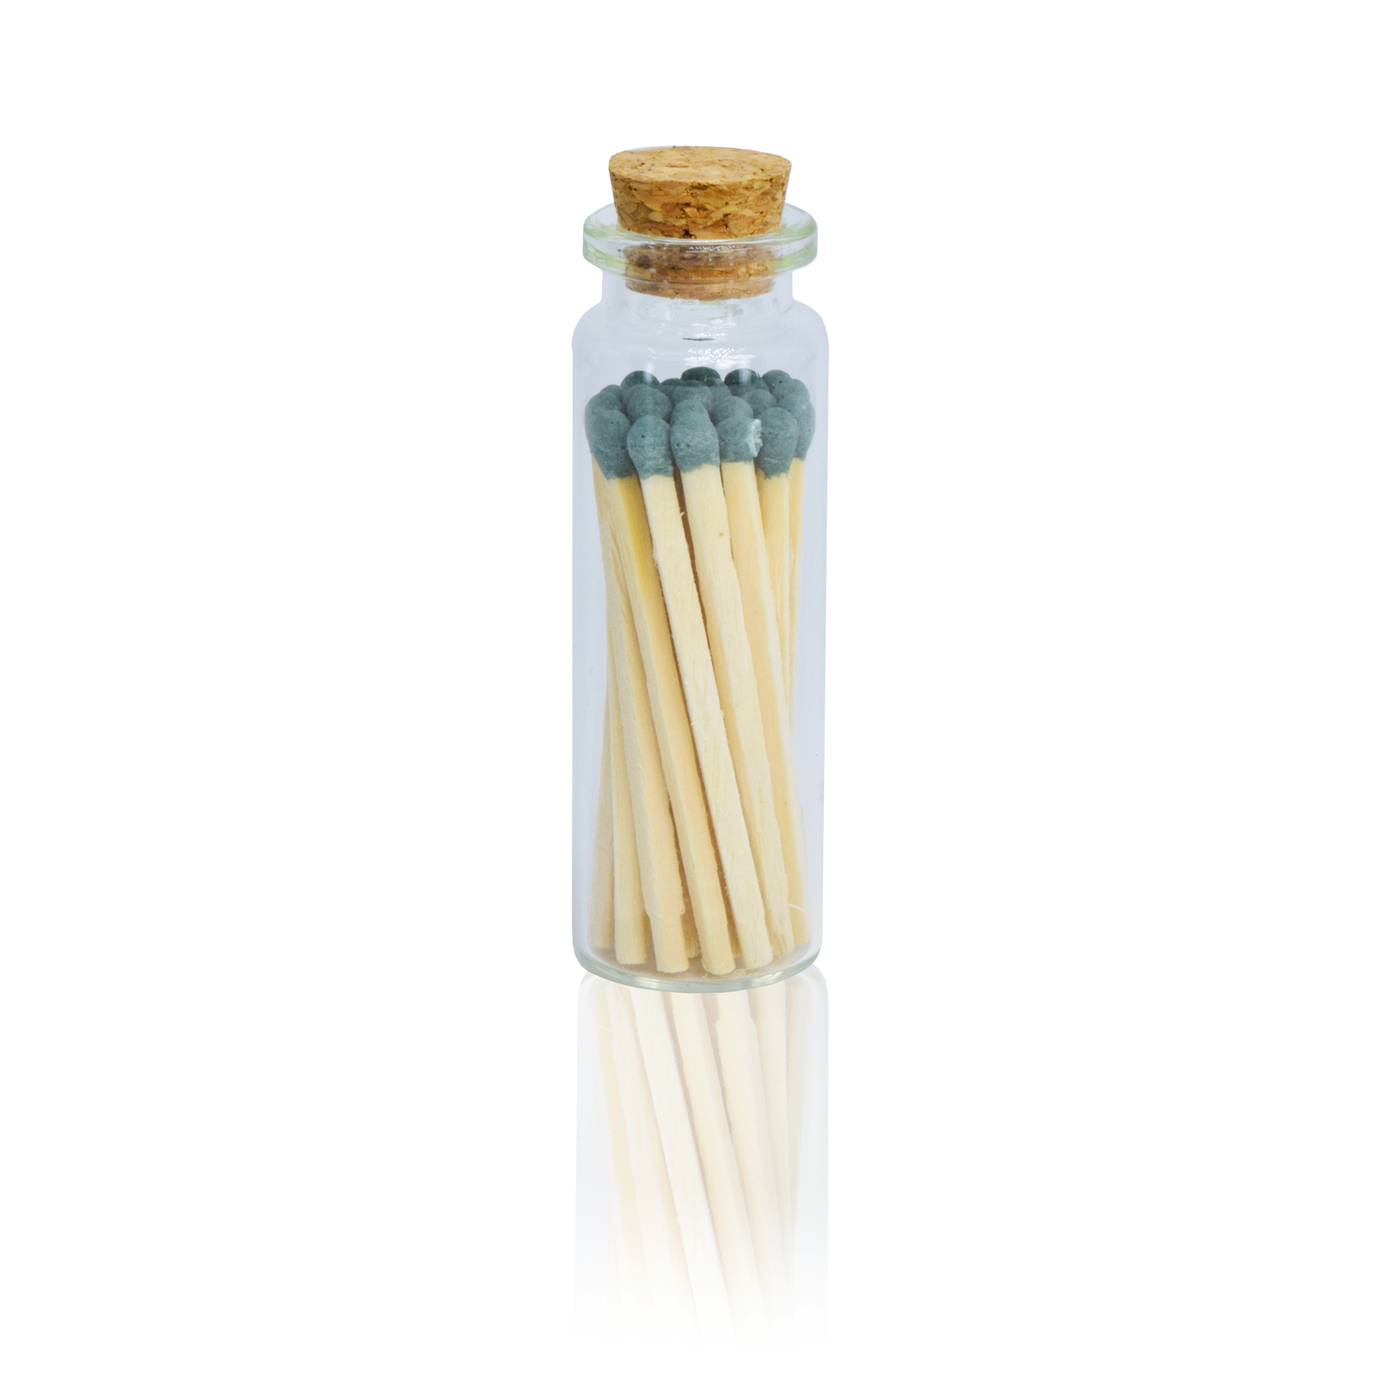 Small Match Bottles - Safety Matches in Jars with Striker: 40 Matchsticks Jar / Mixed Colors